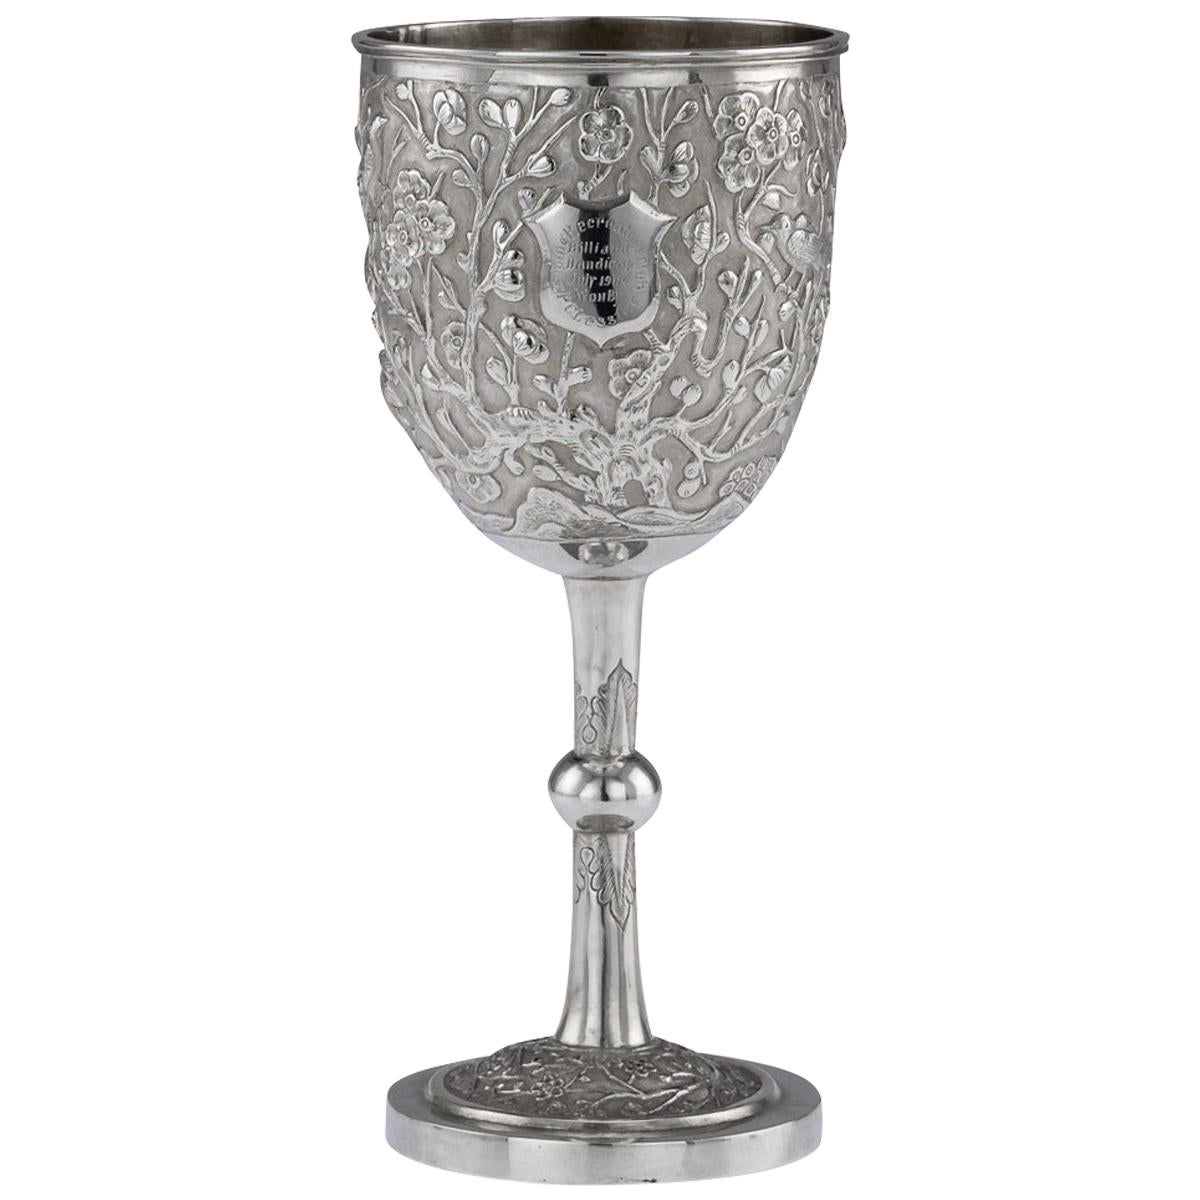 20th Century Chinese Export Silver Presentation Goblet by Taiping, circa 1904